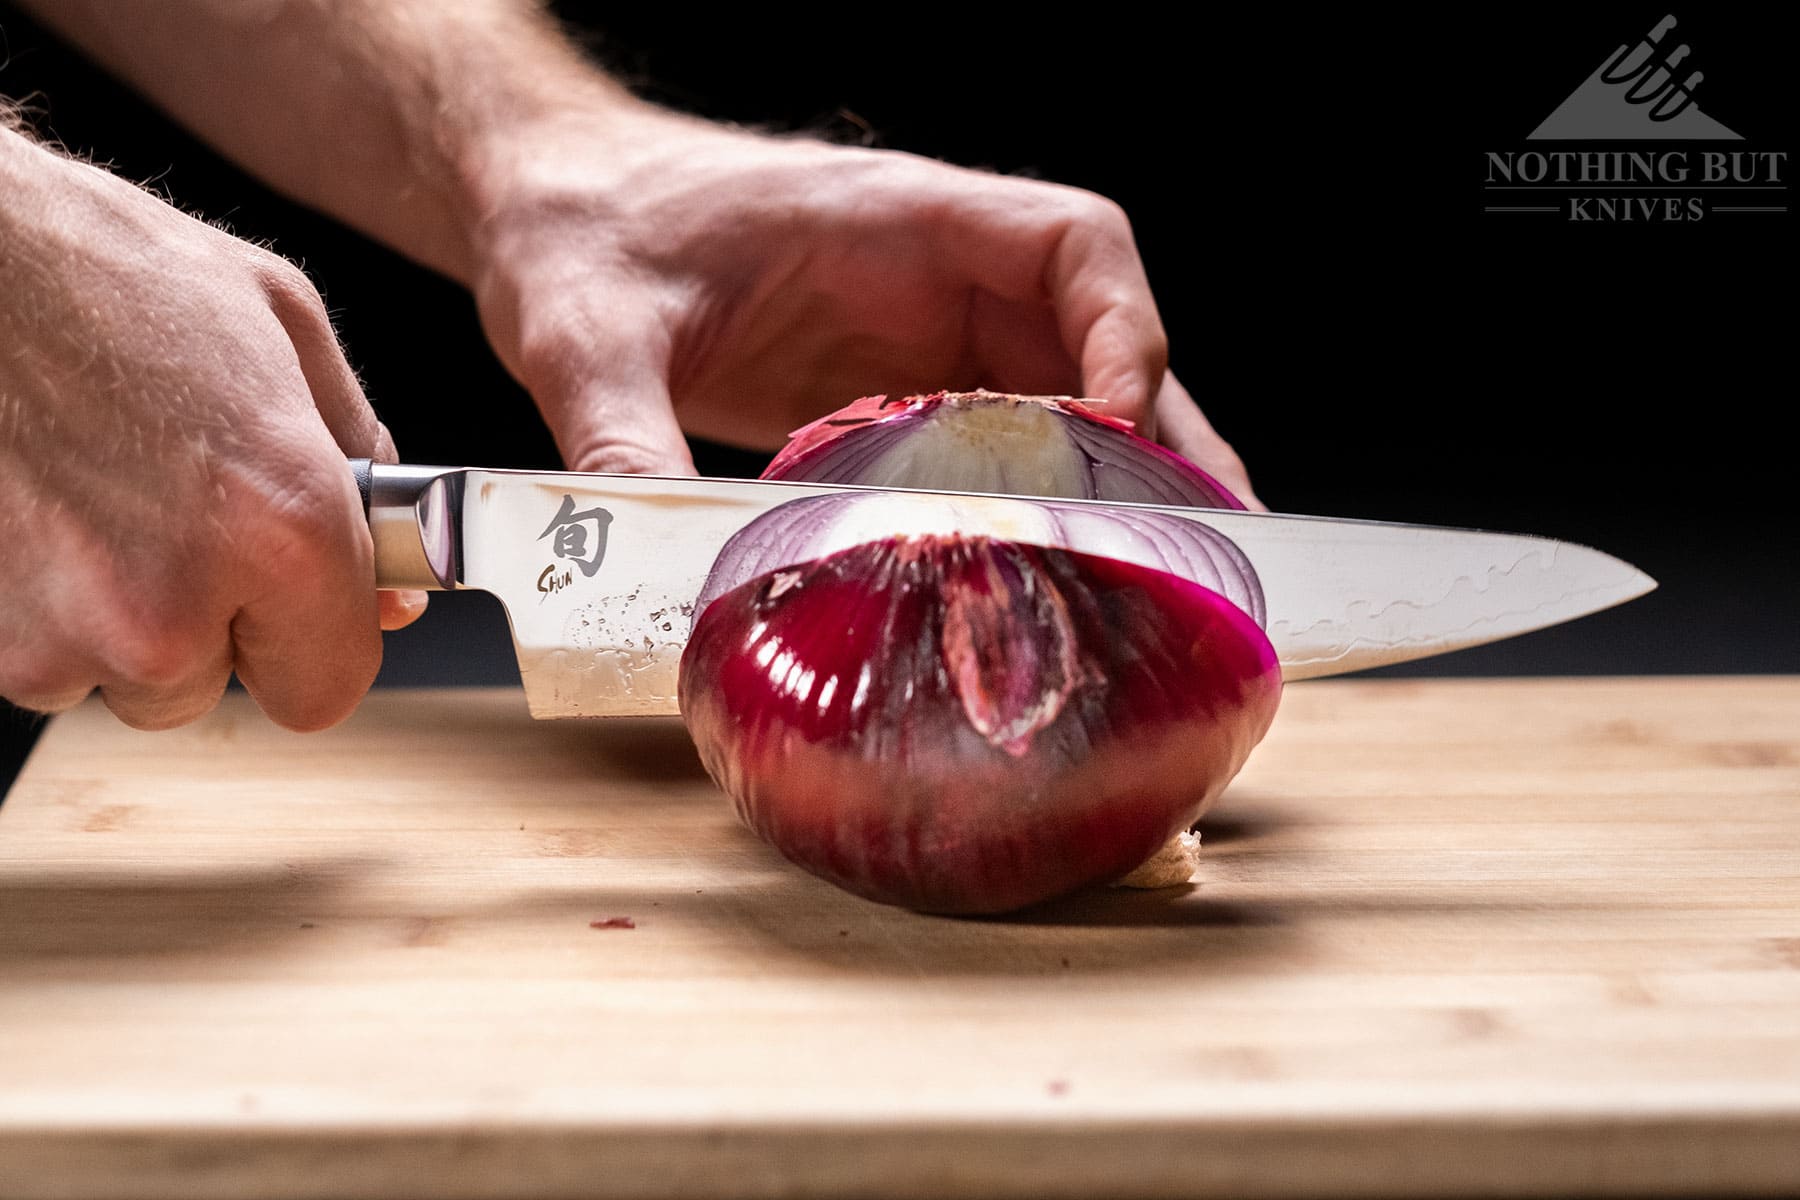 Slicing an onion with the Shun Sora chef knife.